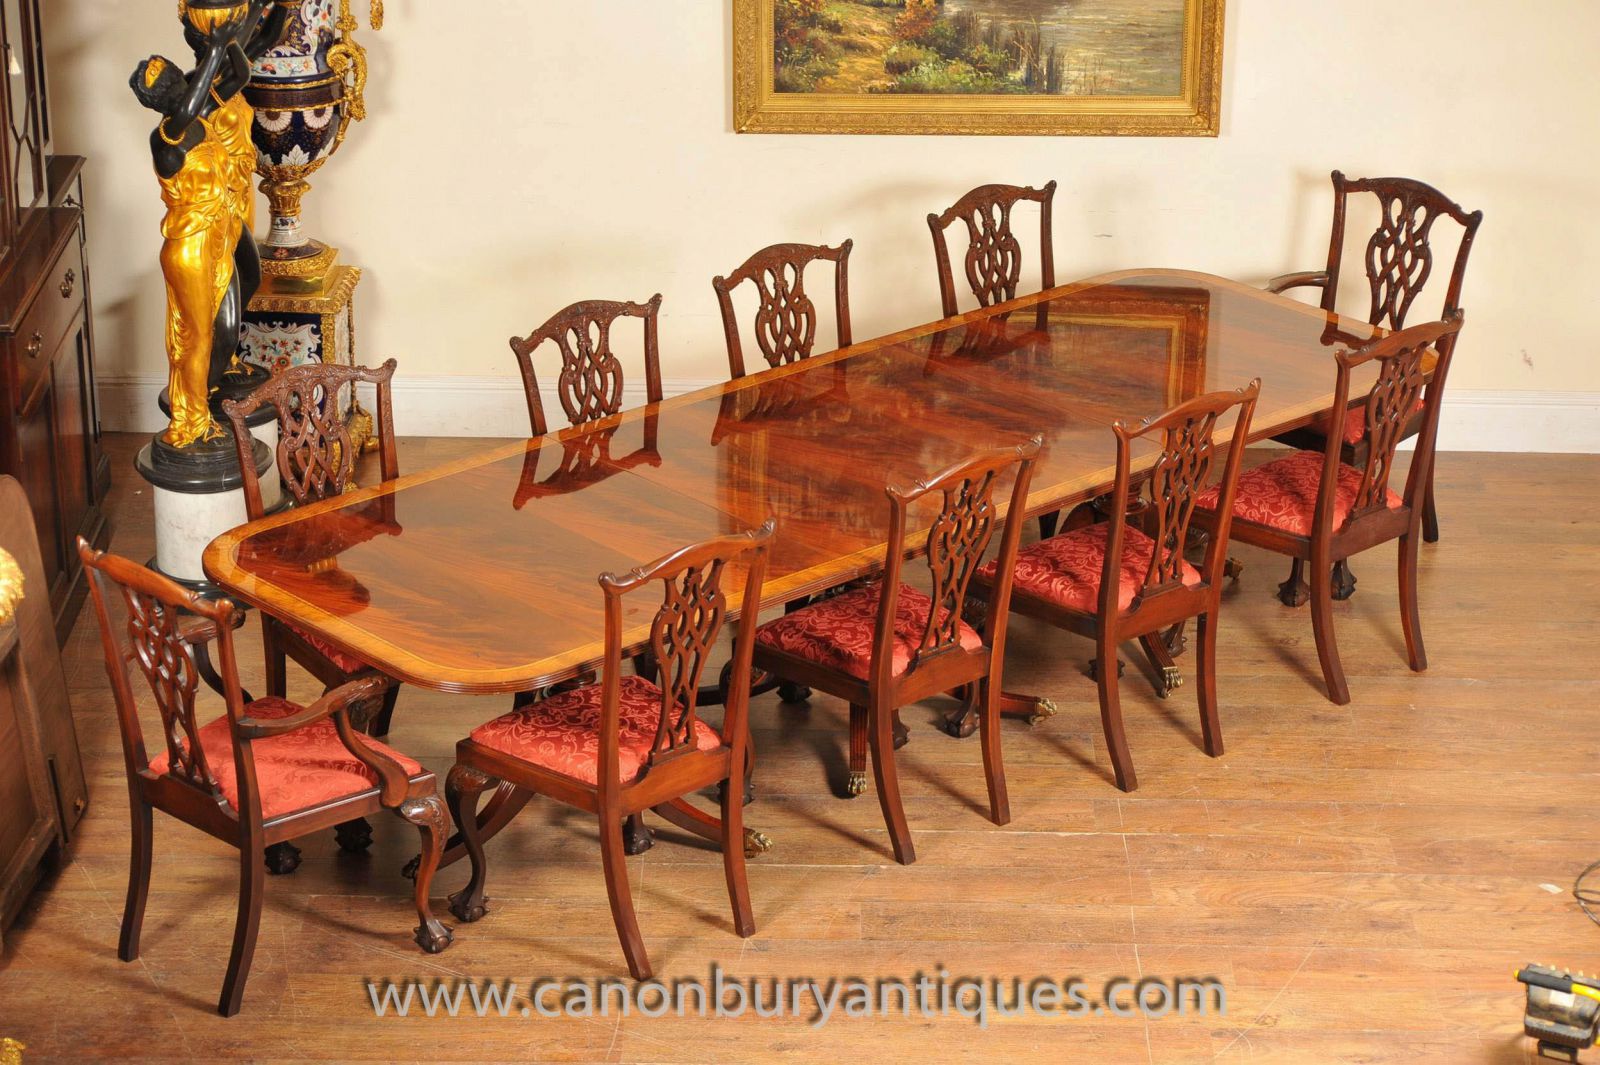 Regency Table and Chippendale Chairs